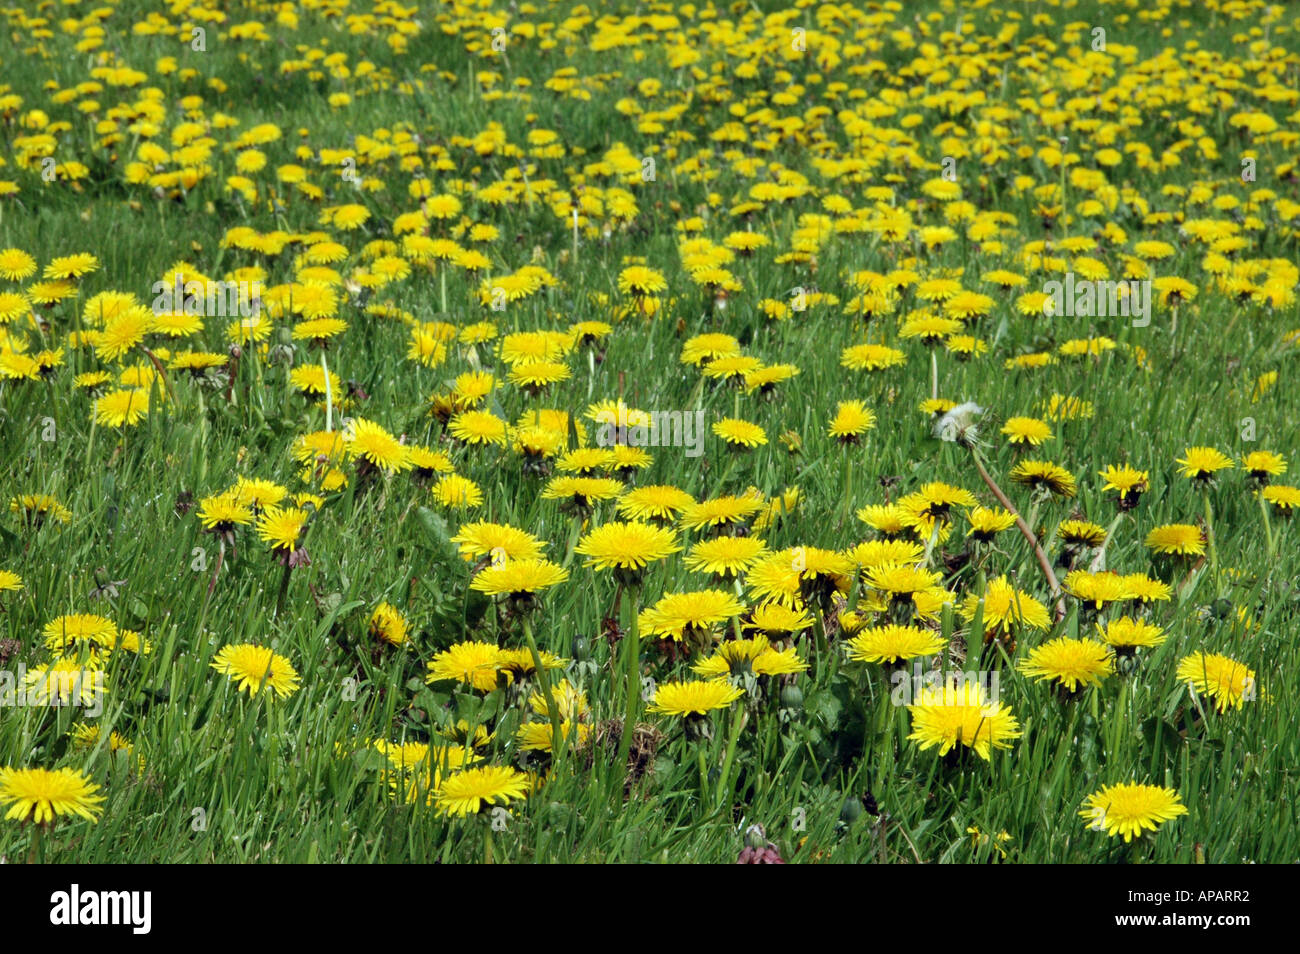 A colourful carpet of Dandelions Stock Photo